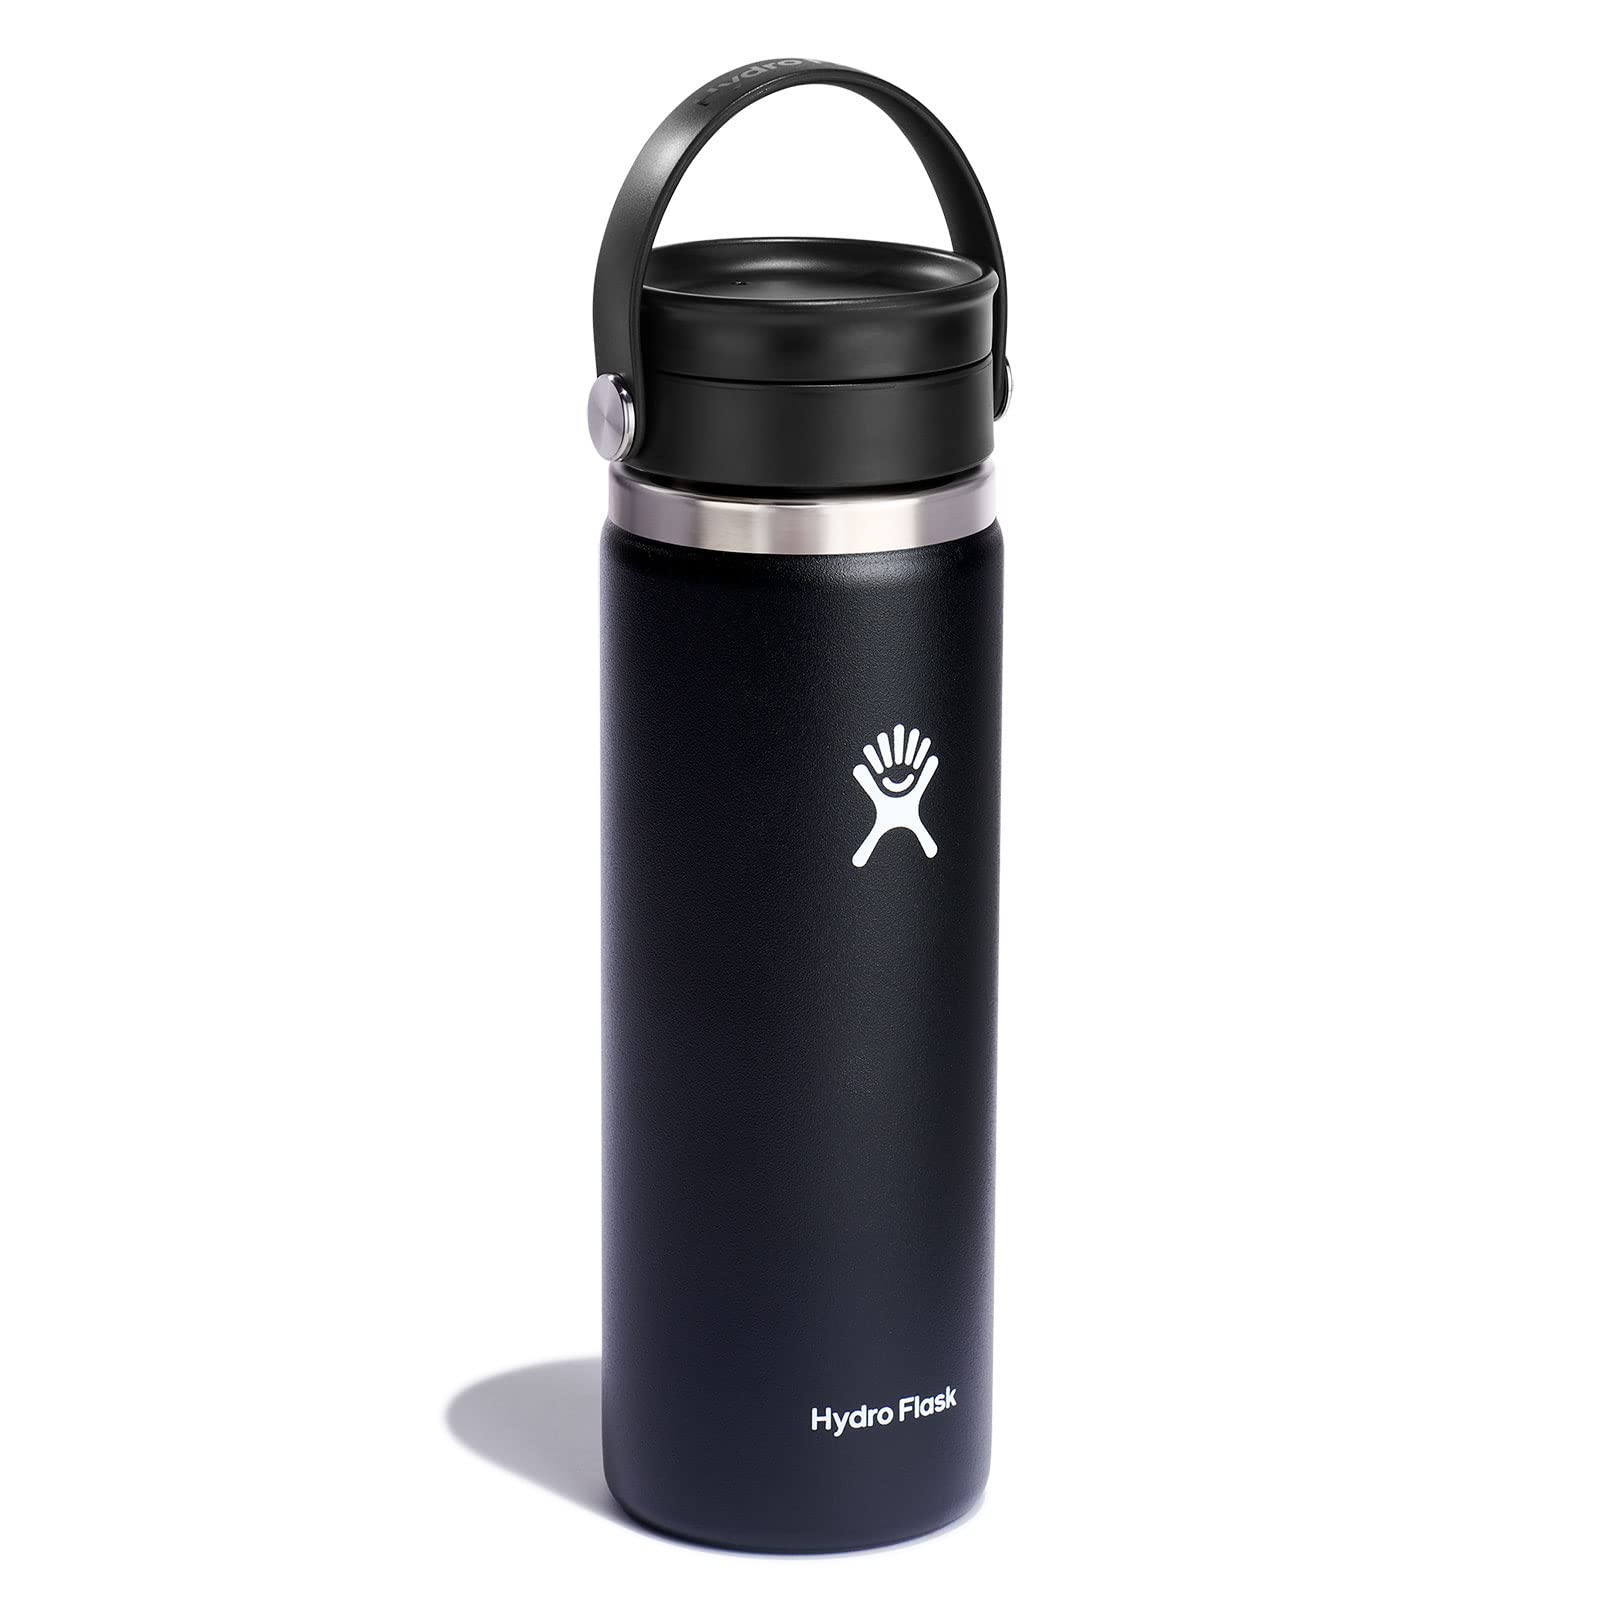 20-Oz Hydro Flask Wide Mouth Insulated Water Bottle w/ Flex Sip Lid (Black) $14.95 + Free Shipping w/ Prime or on $25+